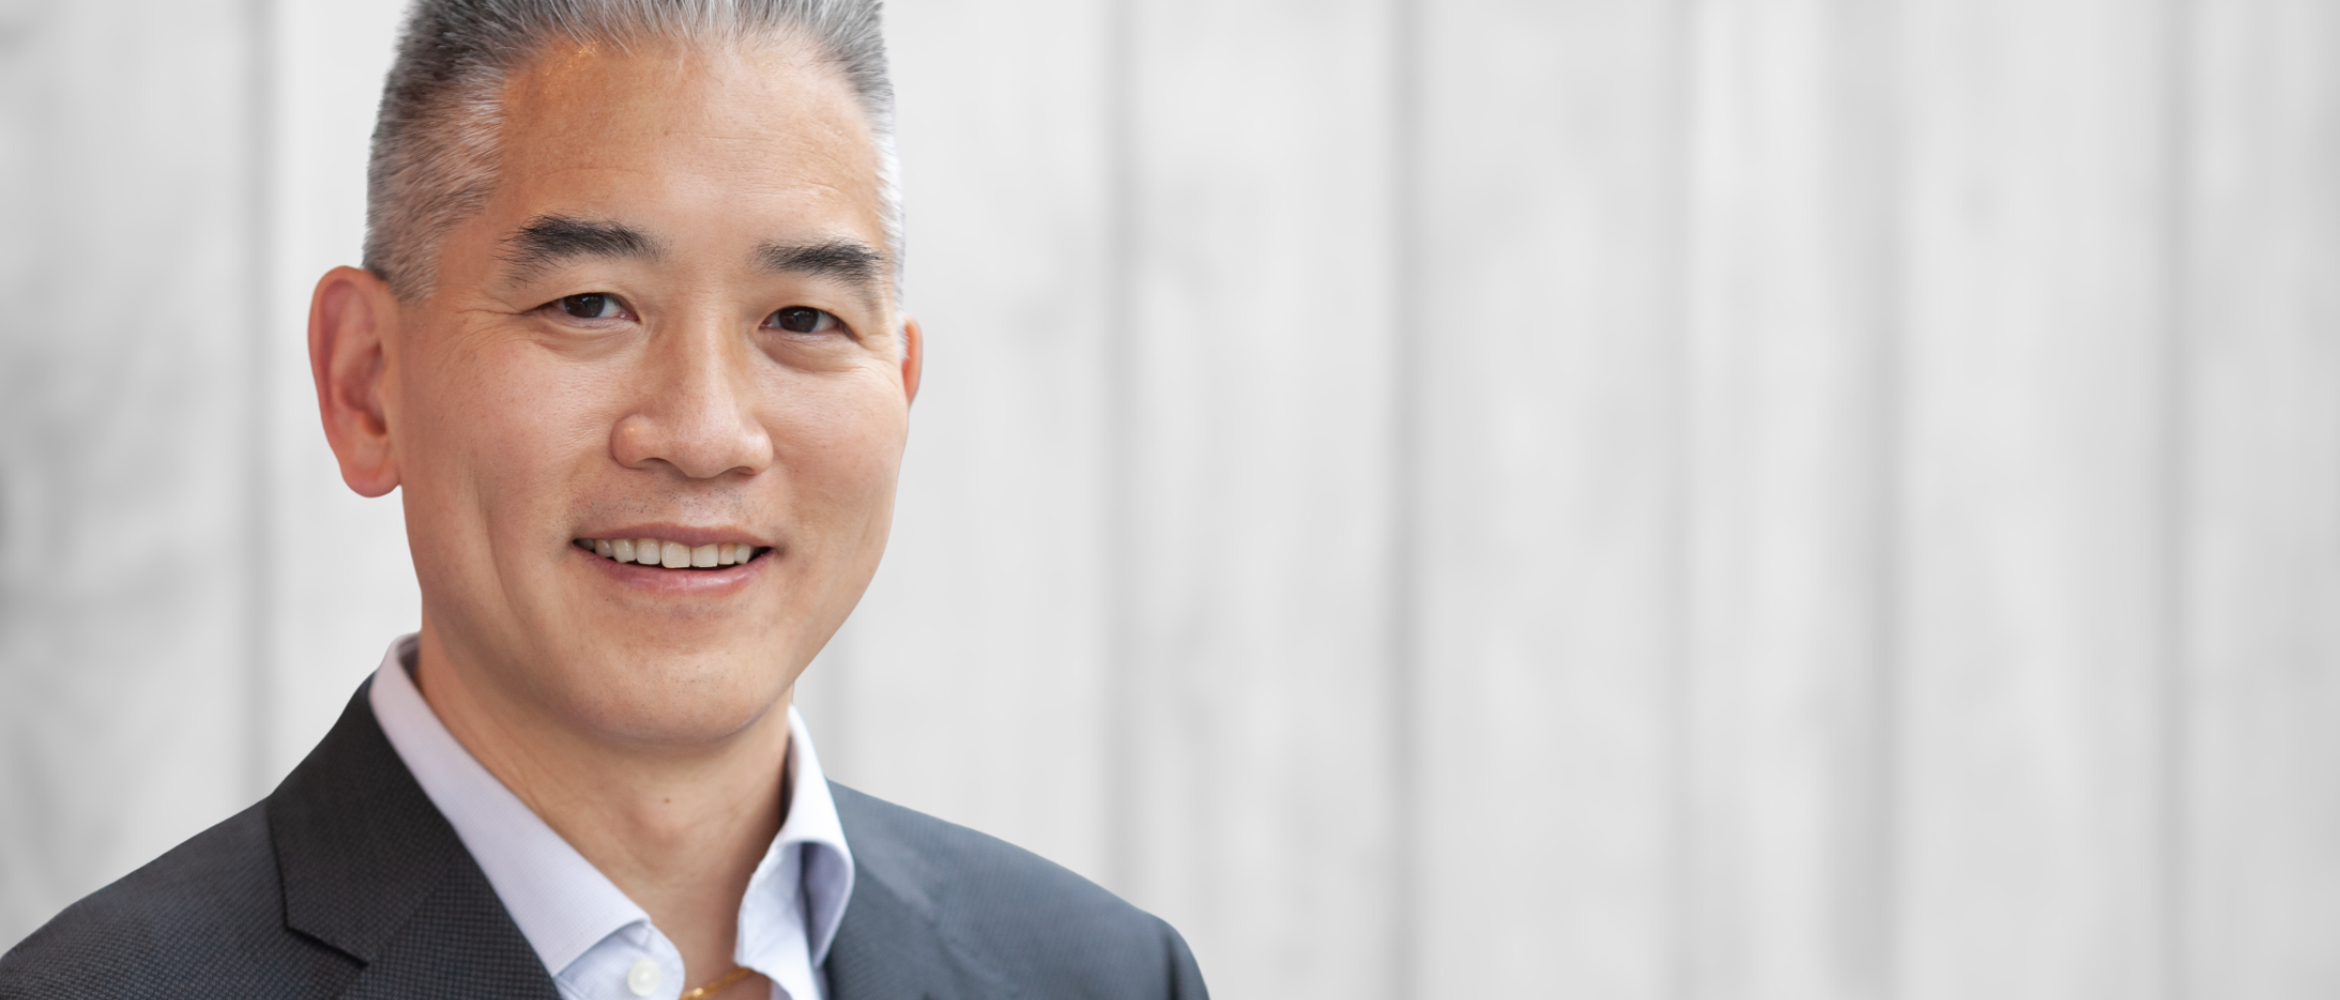 Brian Kwon receives a C$2.4M grant from the United States Department of Defense for SCRIBBLE clinical trial and rapid testing to predict acute spinal cord injury severity and outcome